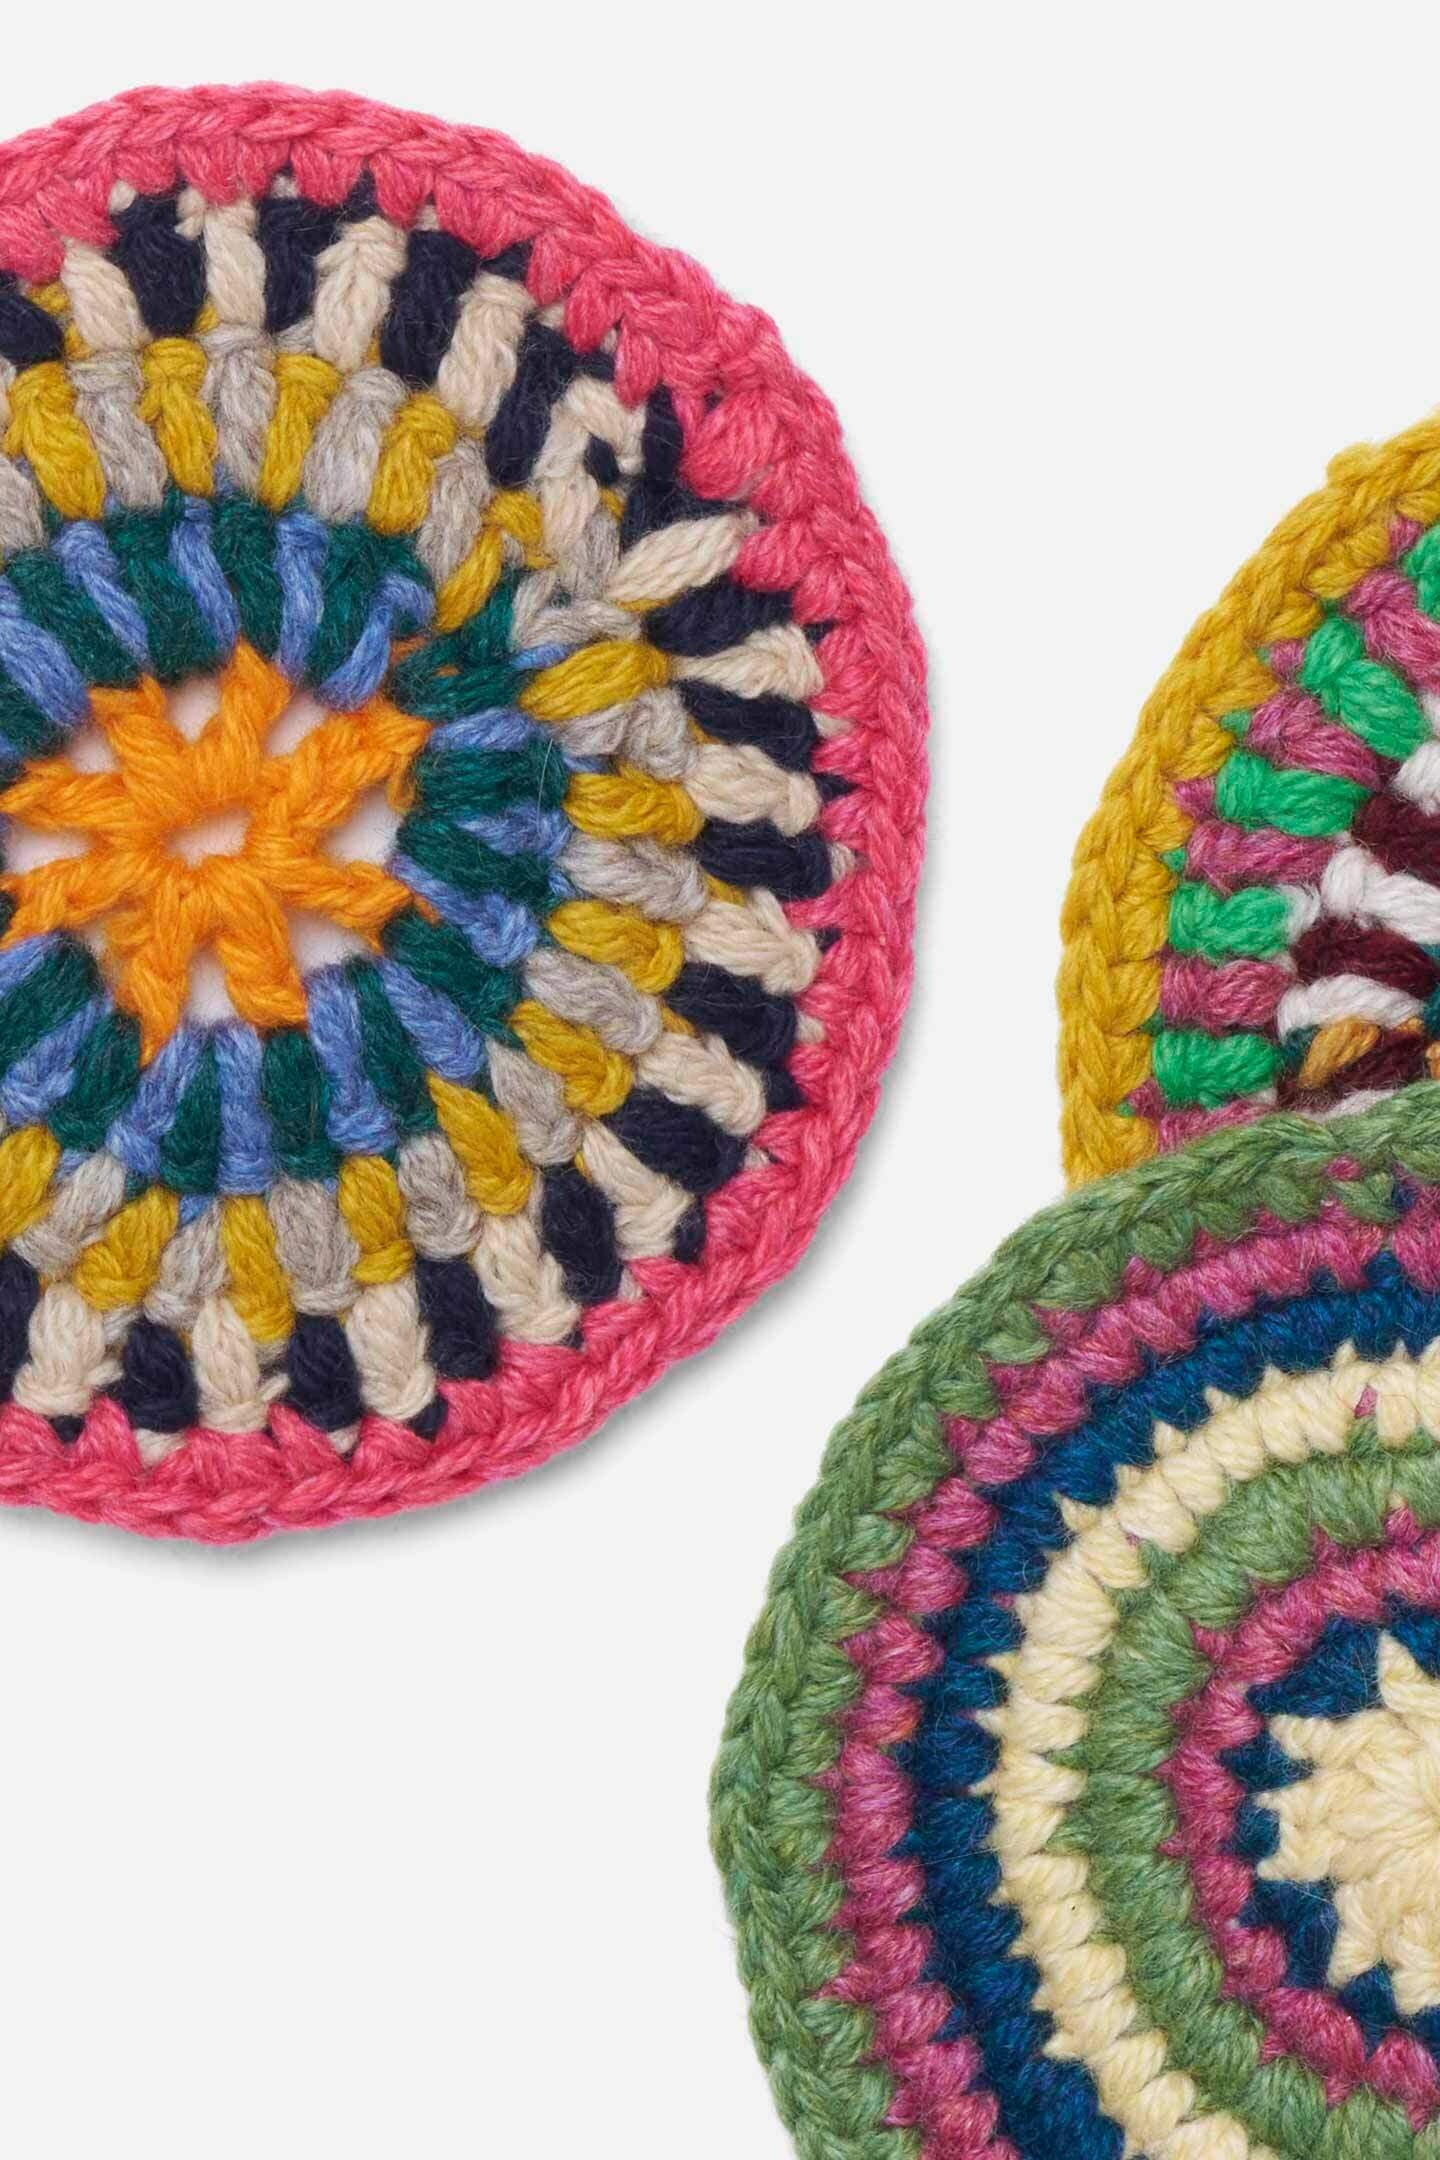 4 PACK CROCHET ROUND COASTERS - 3